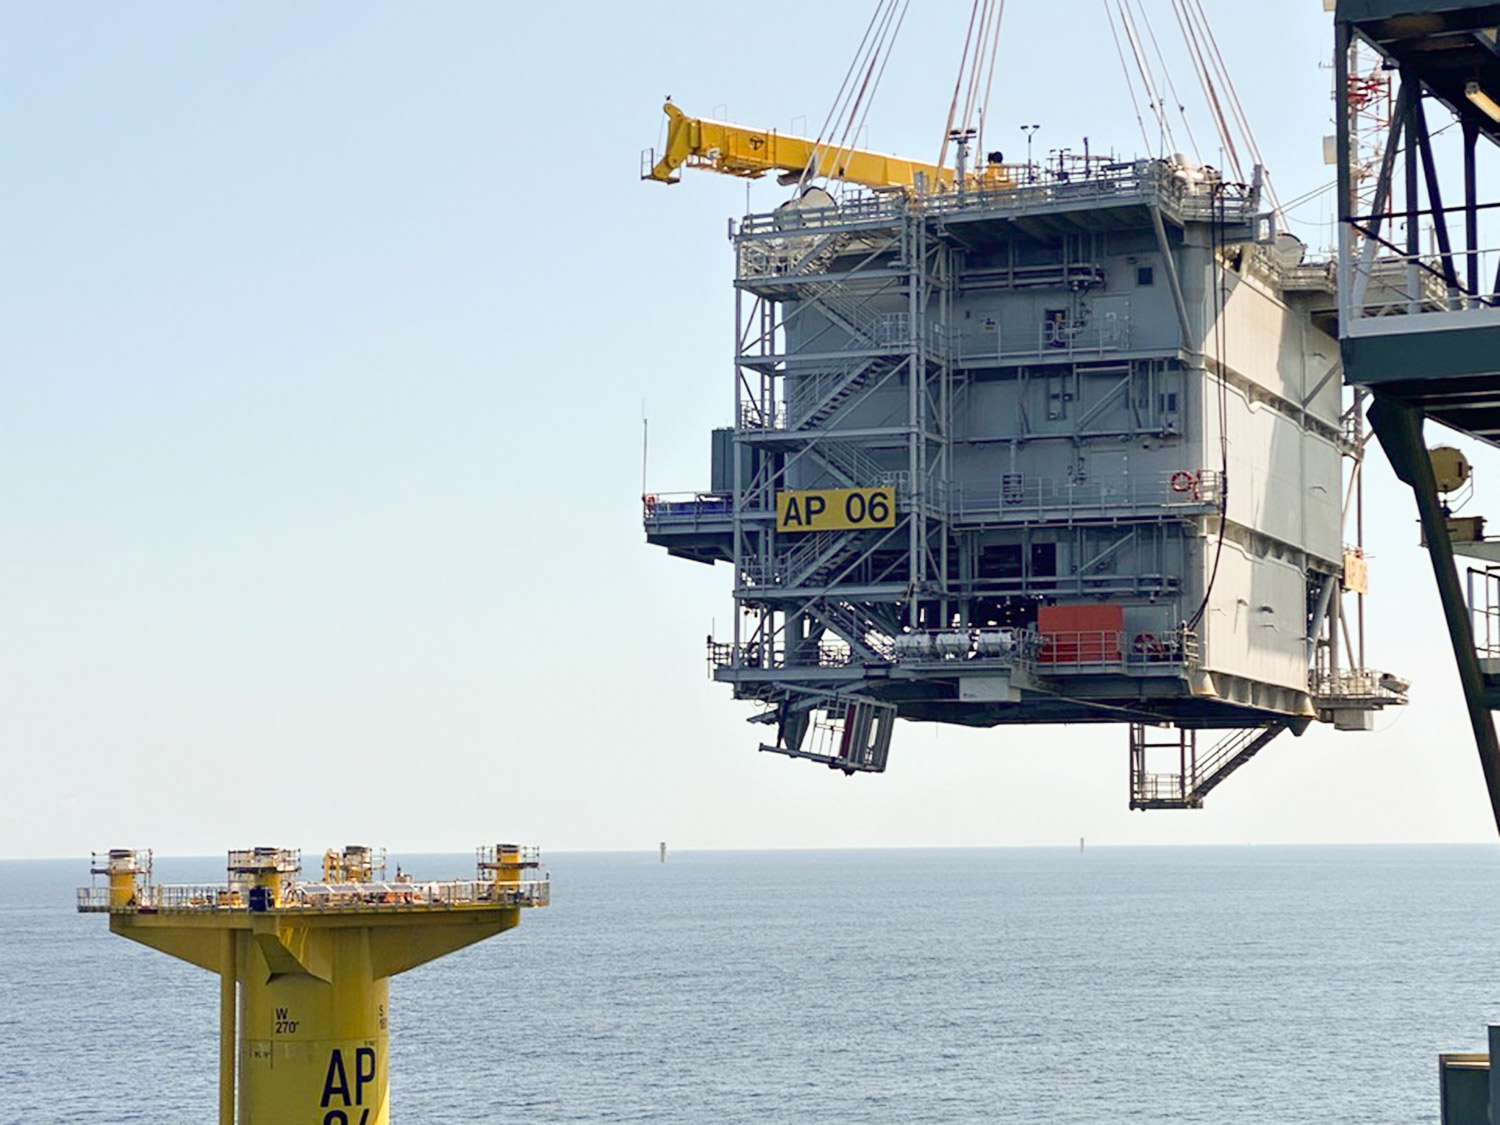 Construction of the South Fork Wind farm continued this week with the installation of its offshore substation. South Fork Wind